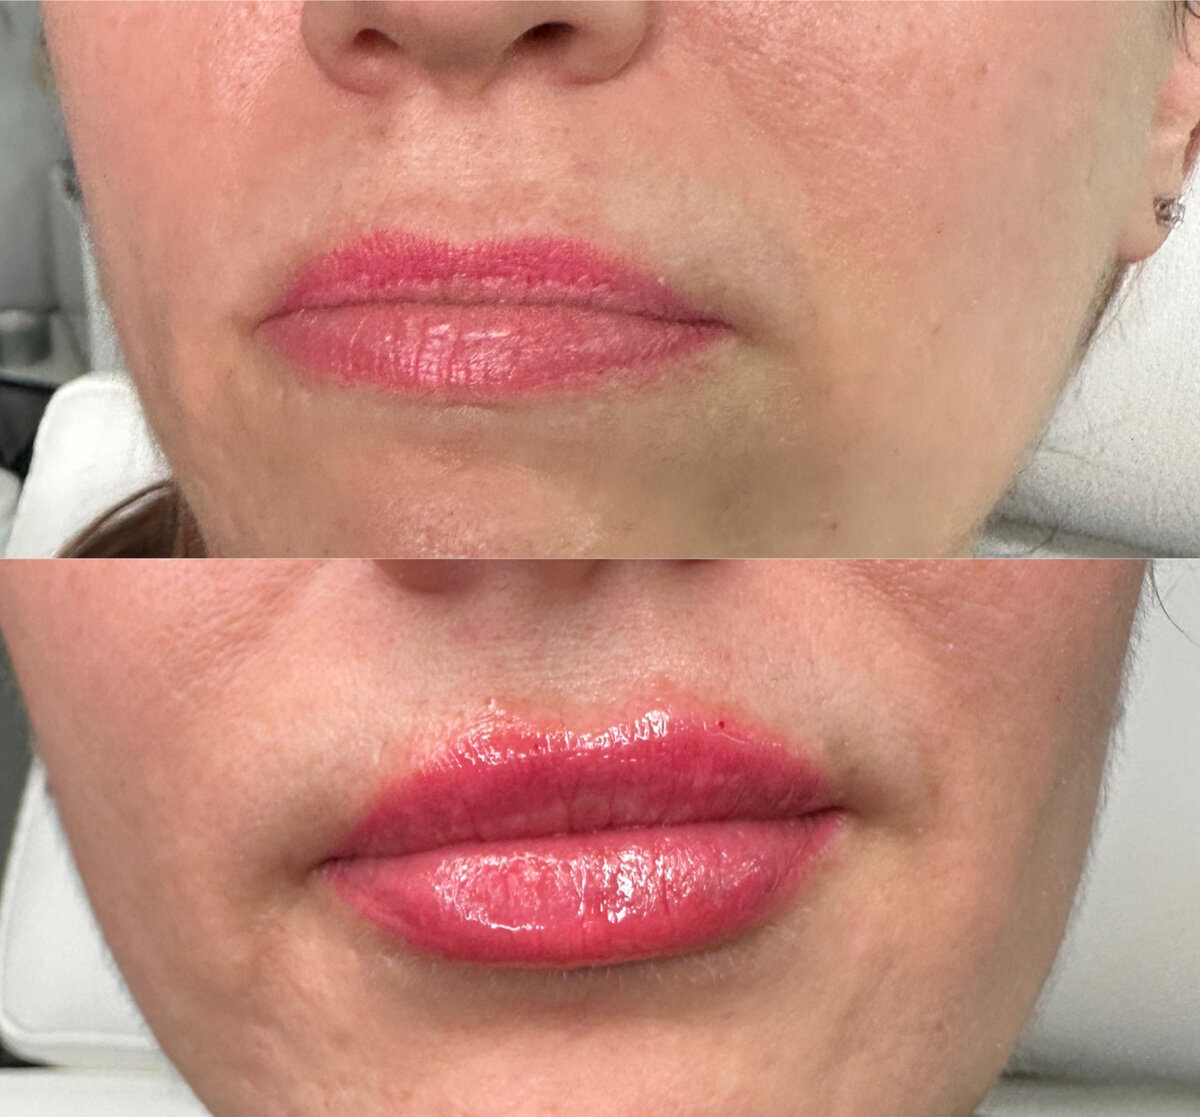 W Aesthetics Dermal Fillers Before and After. Austin Texas 6